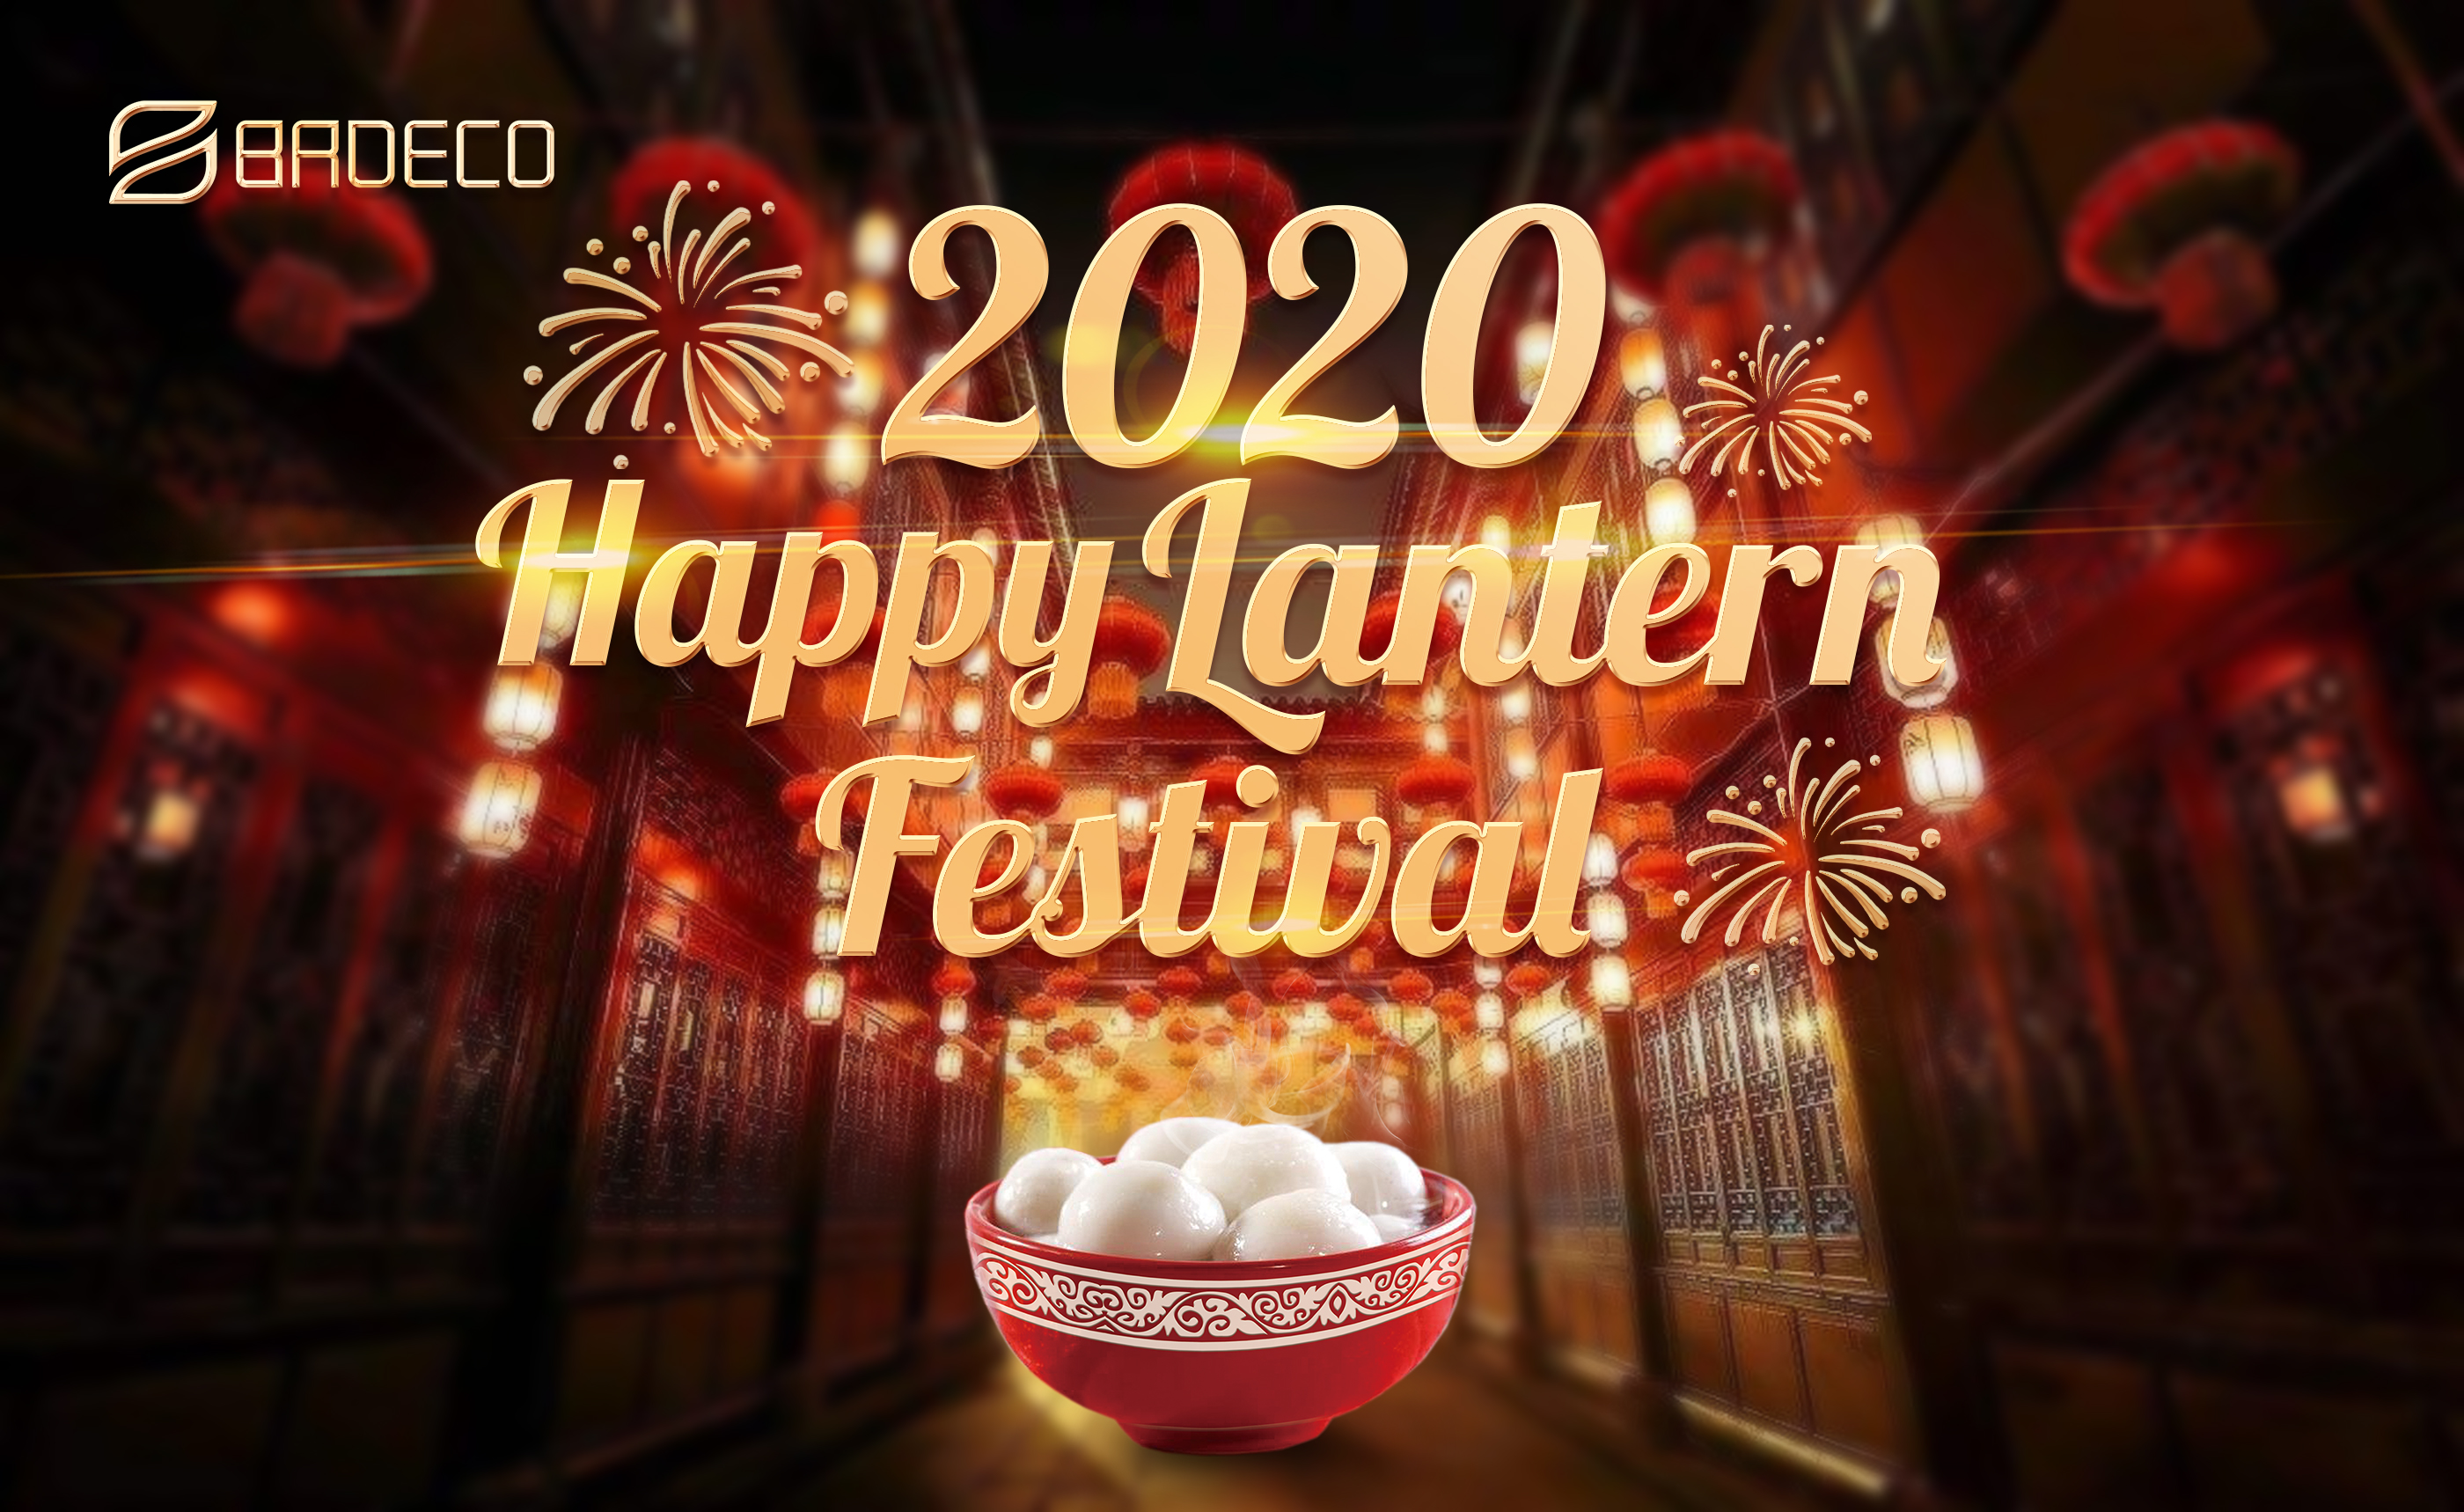 The Lantern Festival Is Coming!